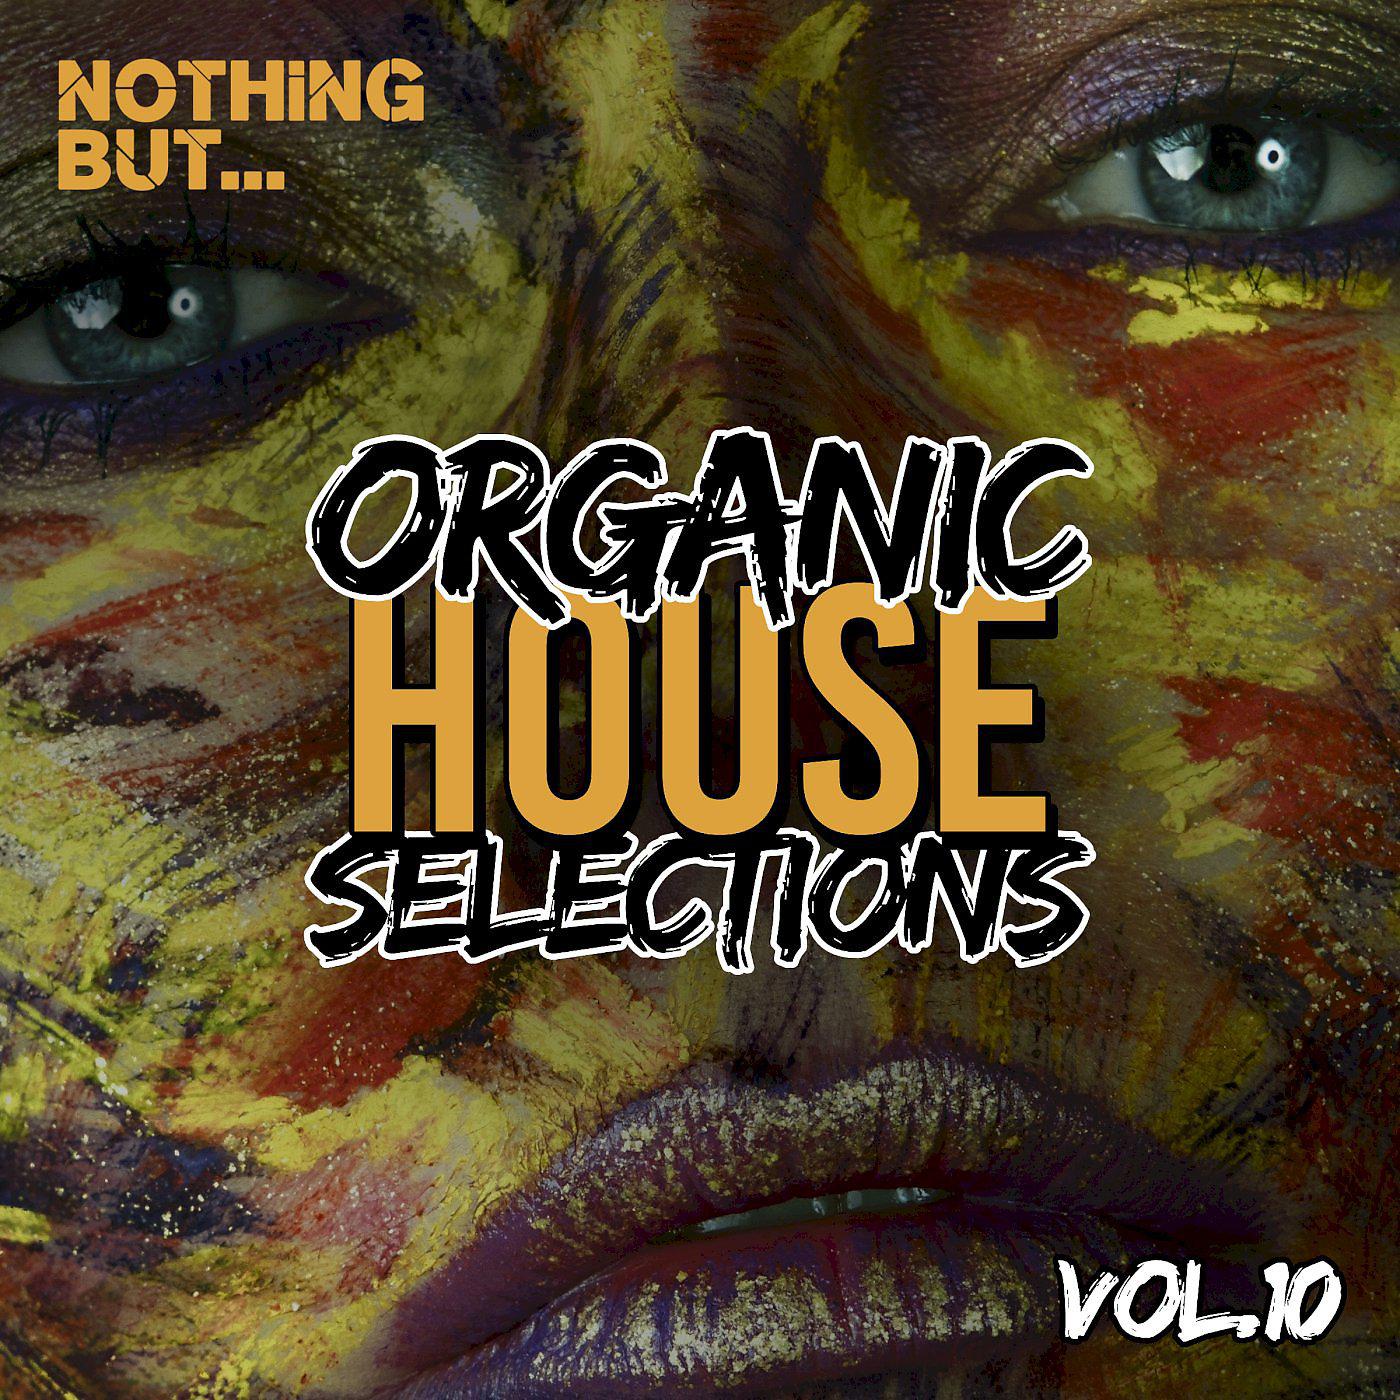 Постер альбома Nothing But... Organic House Selections, Vol. 10